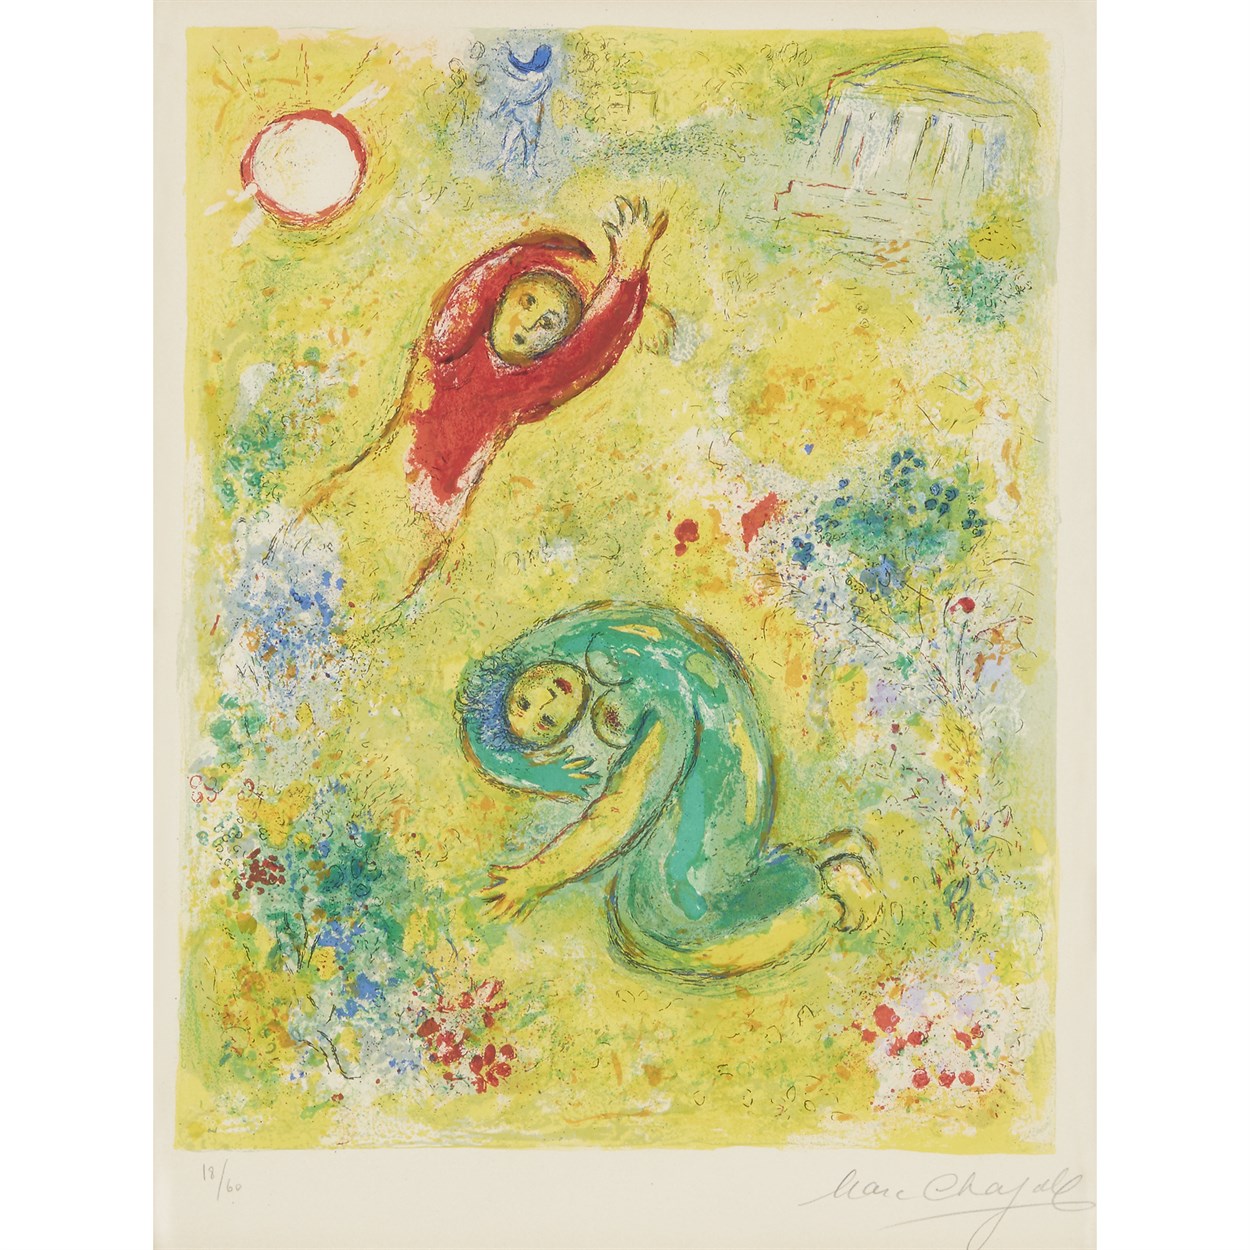 Lot 1 - MARC CHAGALL  (FRENCH/RUSSIAN, 1887-1985)